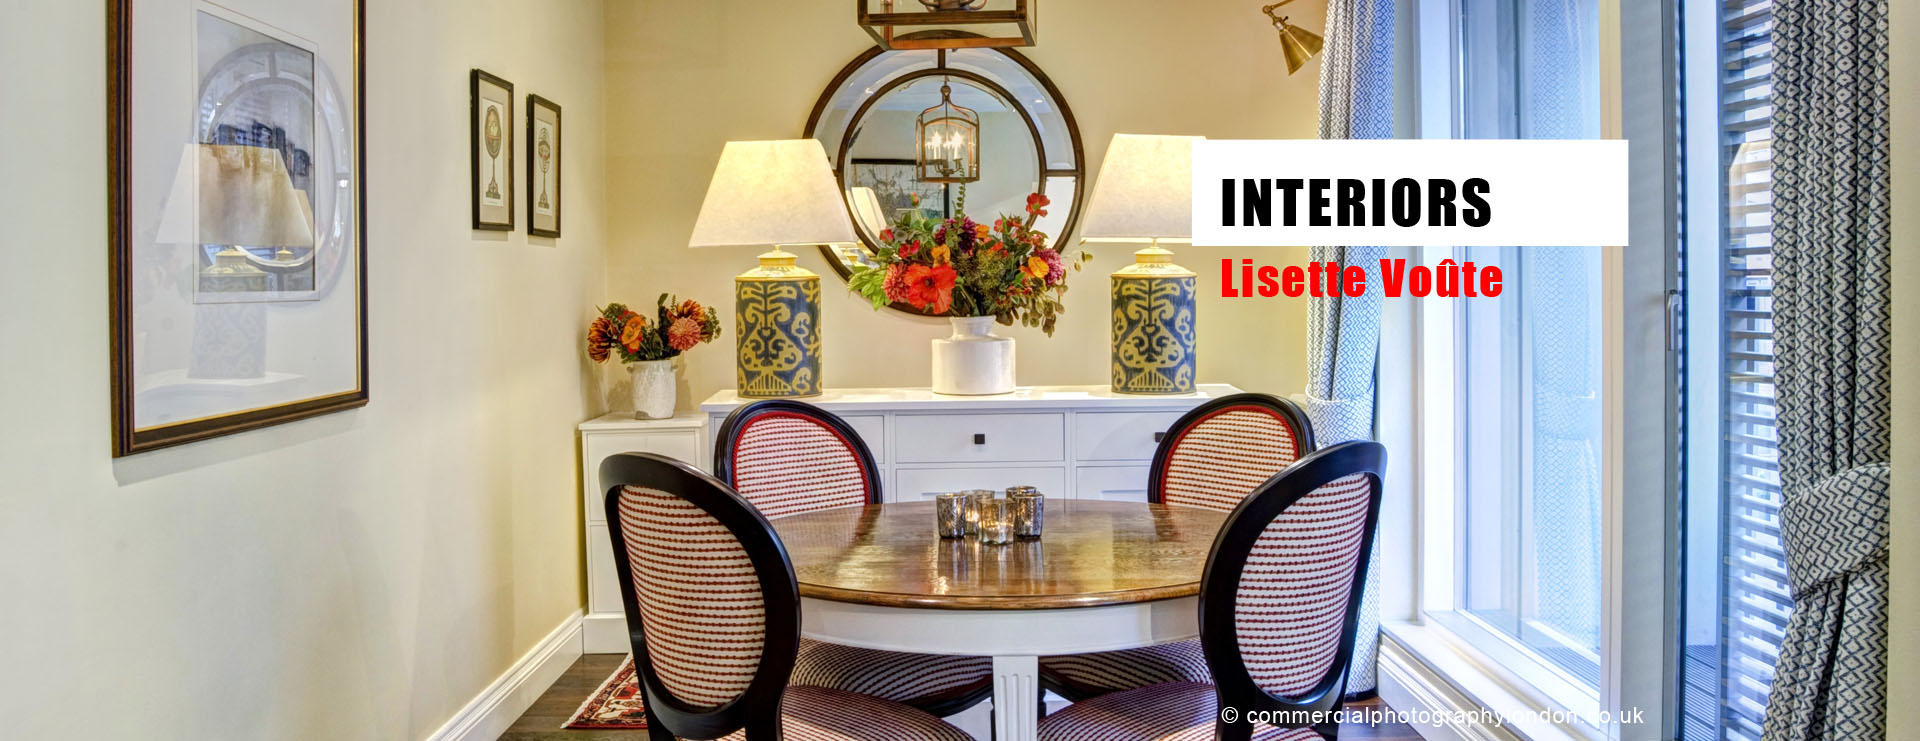 Advertising photographer London interiors photo home page.